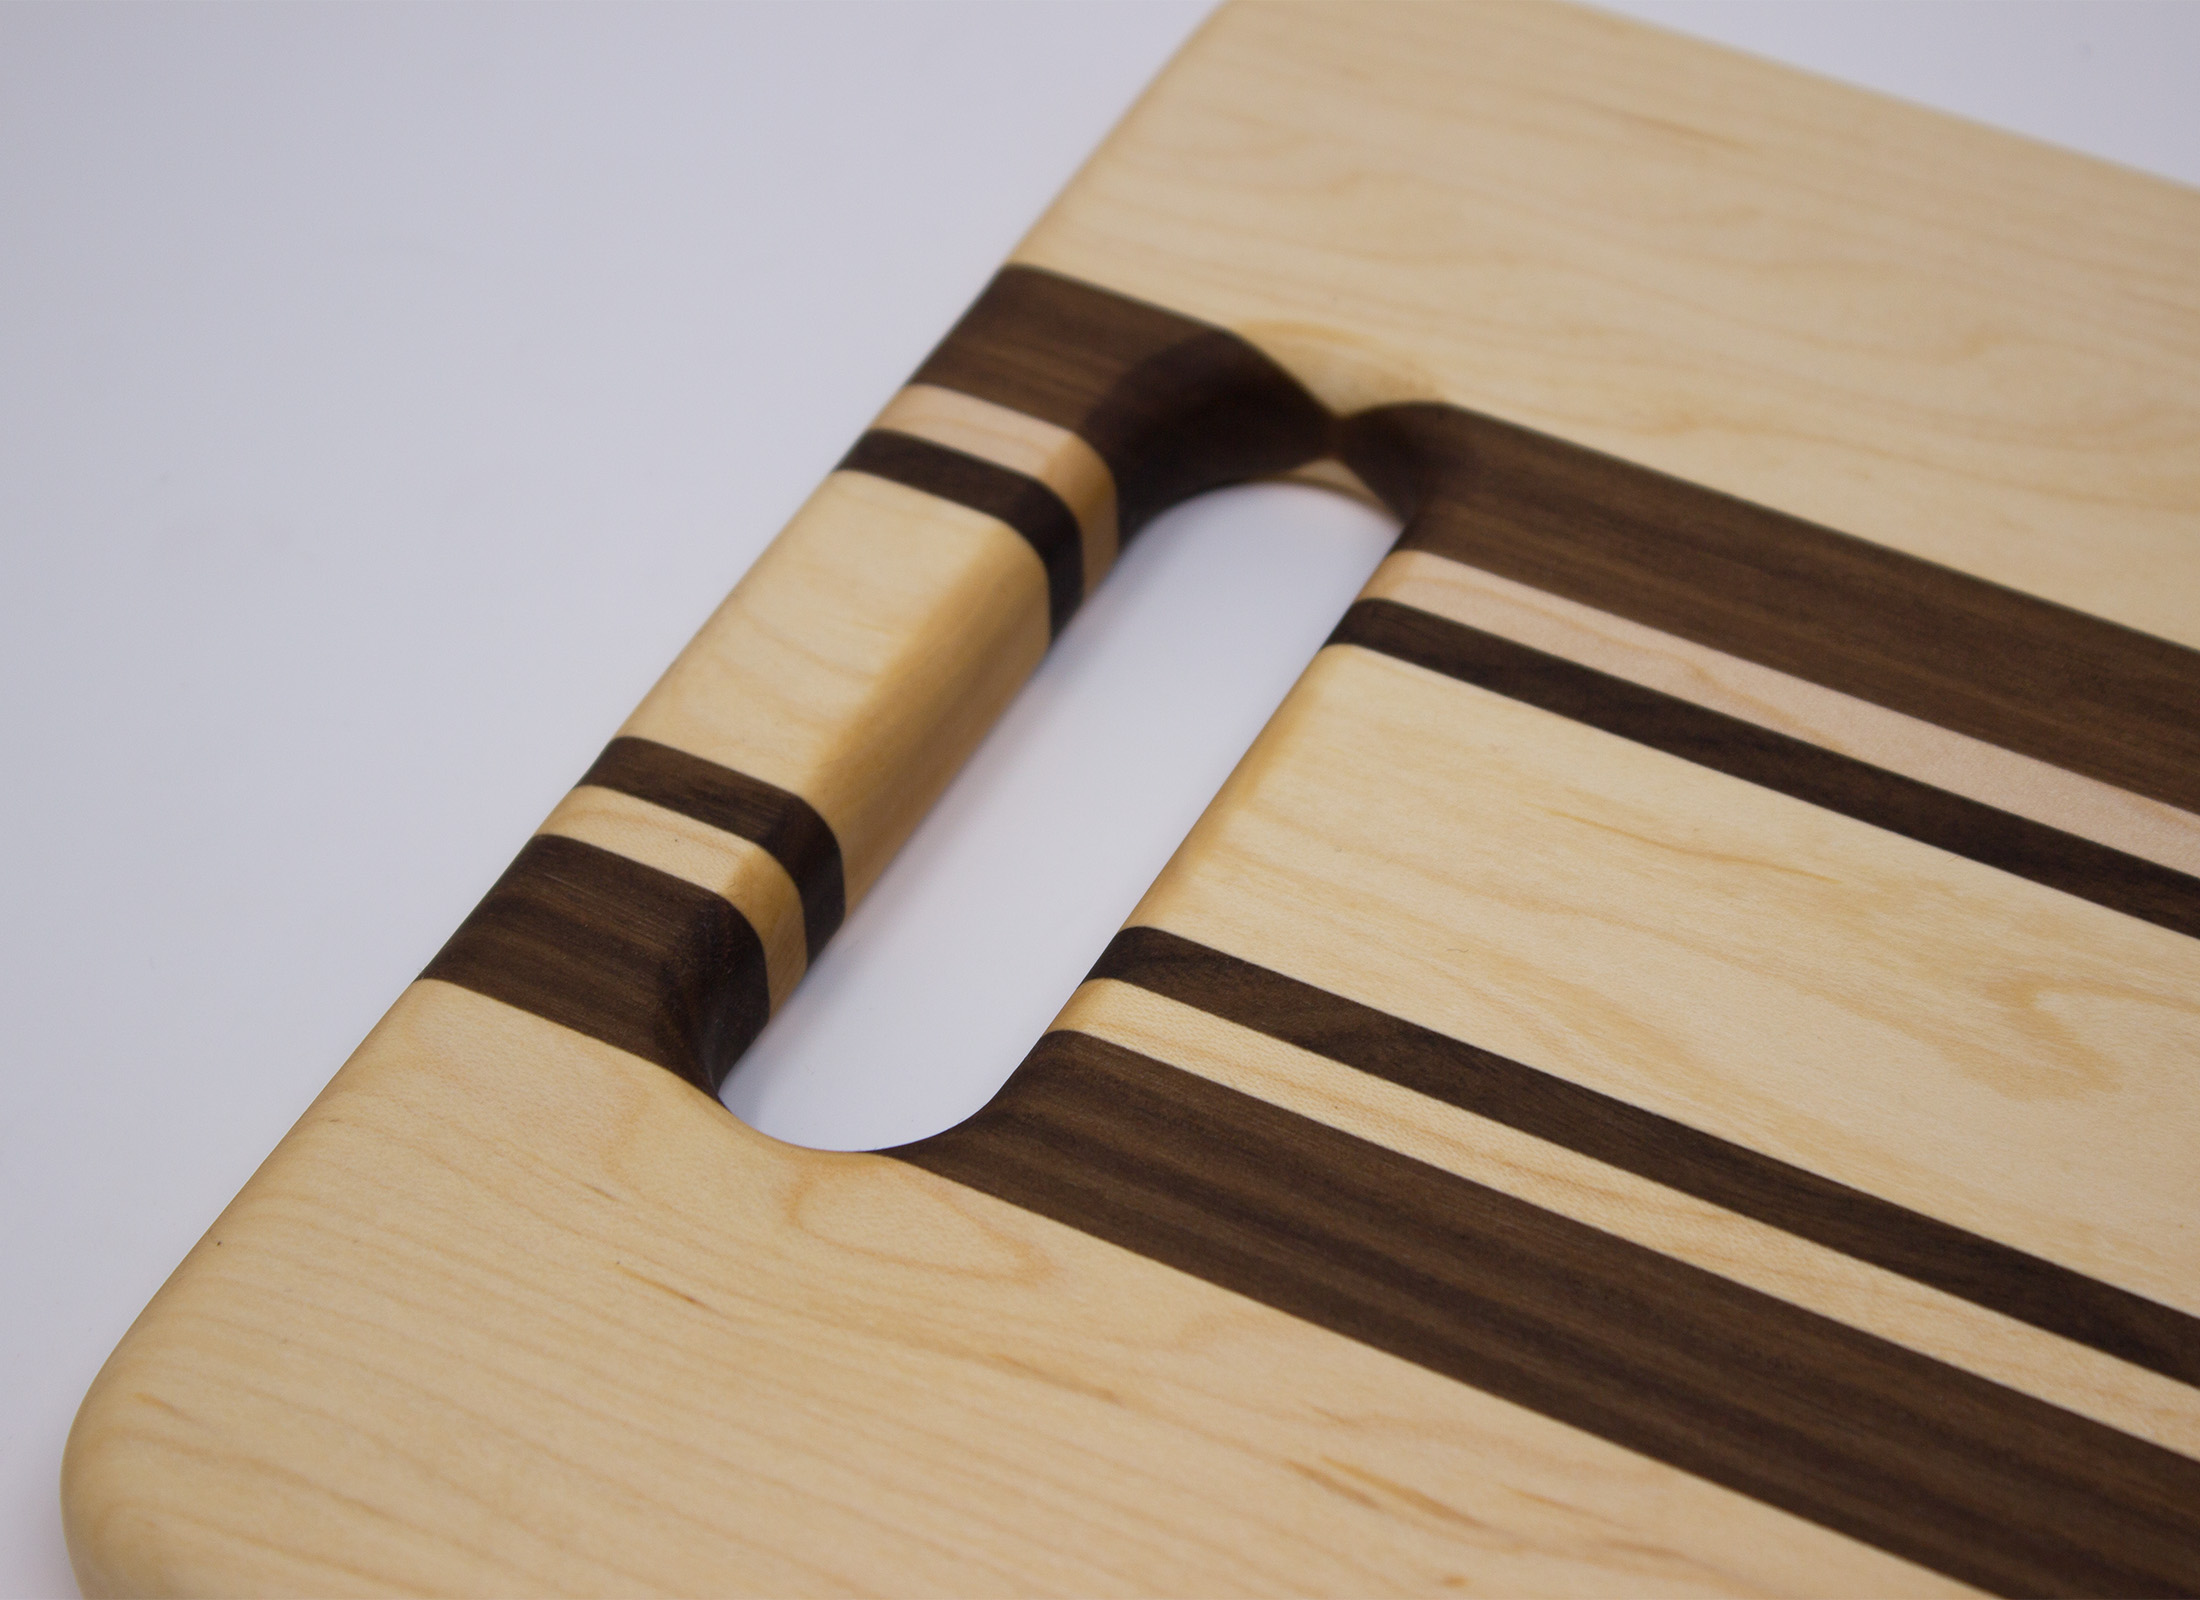 https://www.rockfordwoodcrafts.com/wp-content/uploads/Maple-and-Walnut-with-Handle-Cutting-Board-Handle-Close-Up.jpg